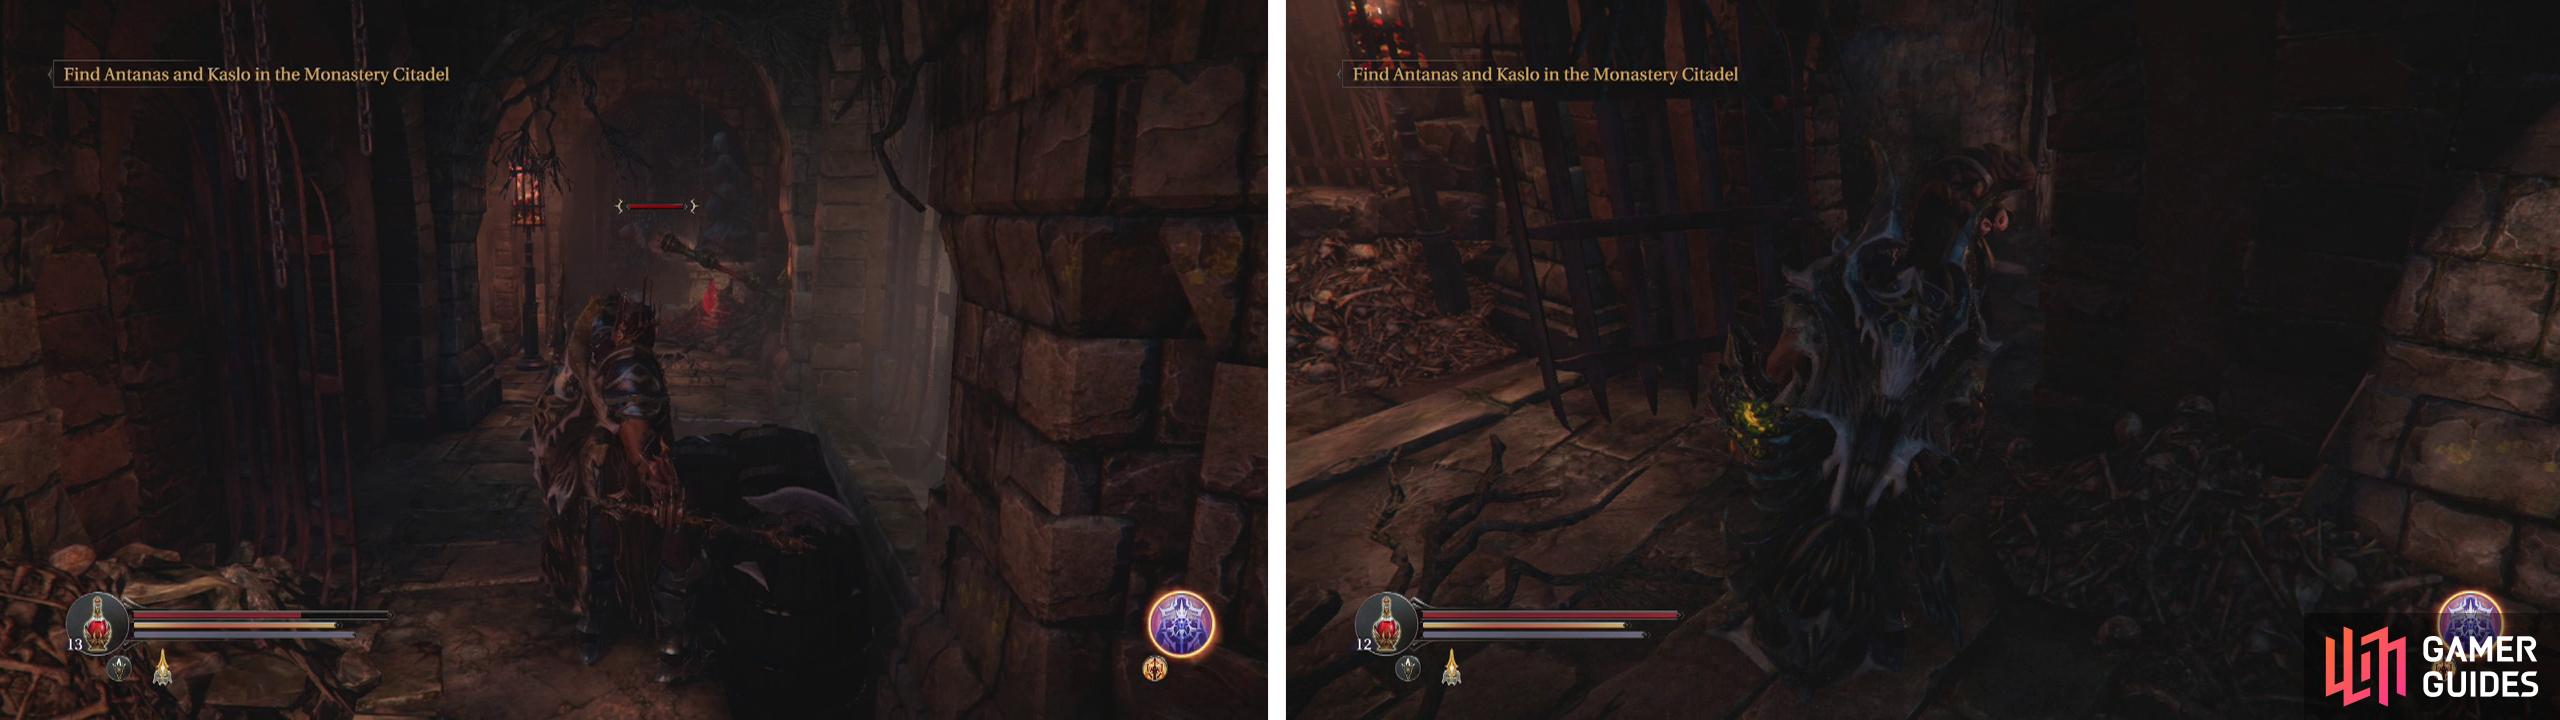 Enter the wooden door near the lever (left) for a Lever Handle item. Use this to open the Infected Monks cell and kill him (right) to complete the side-quest.